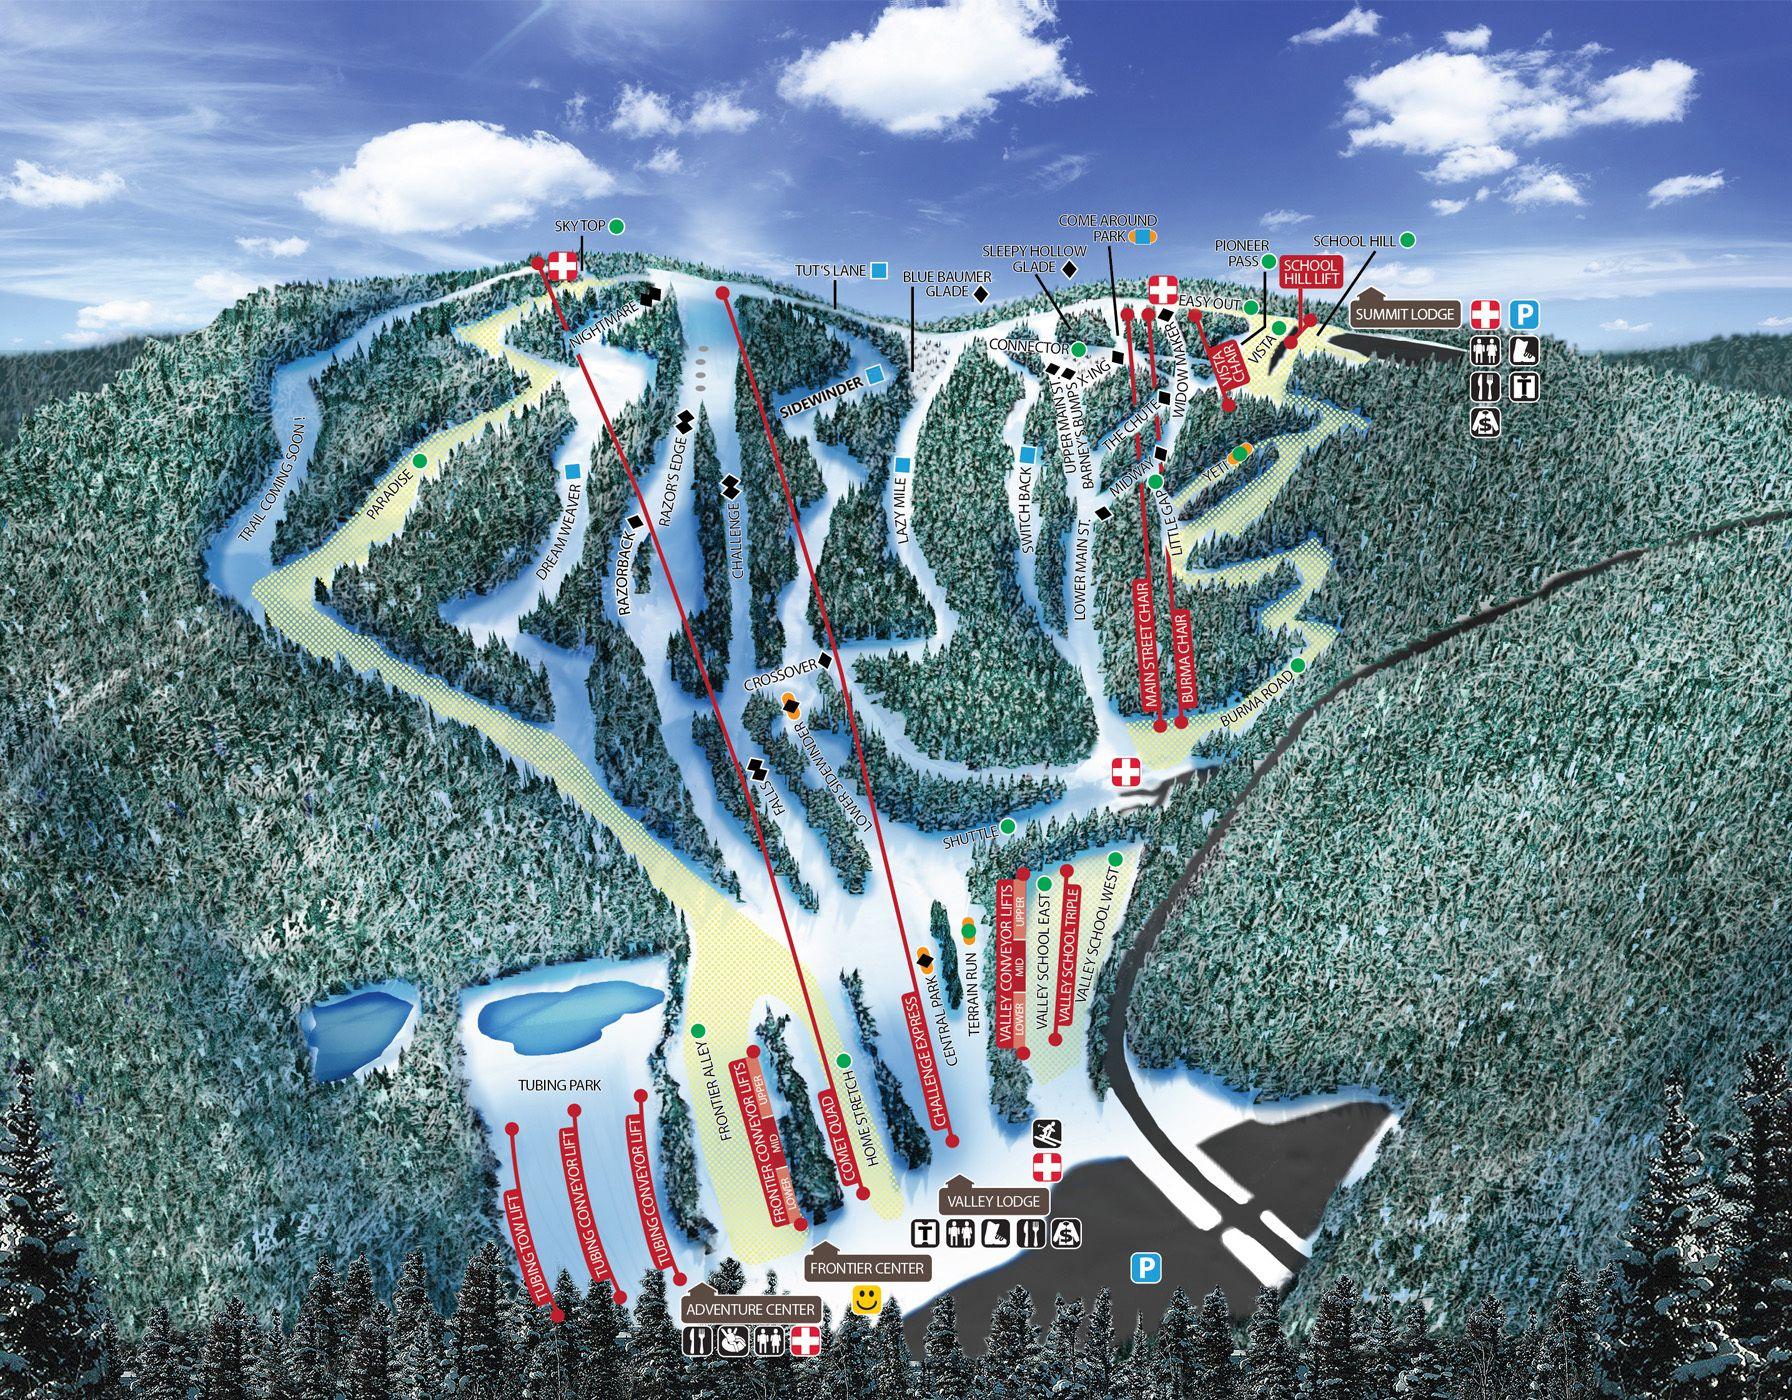 Blue Mountain Resort Logo - Blue Mountain Resort Piste Map | Plan of ski slopes and lifts ...